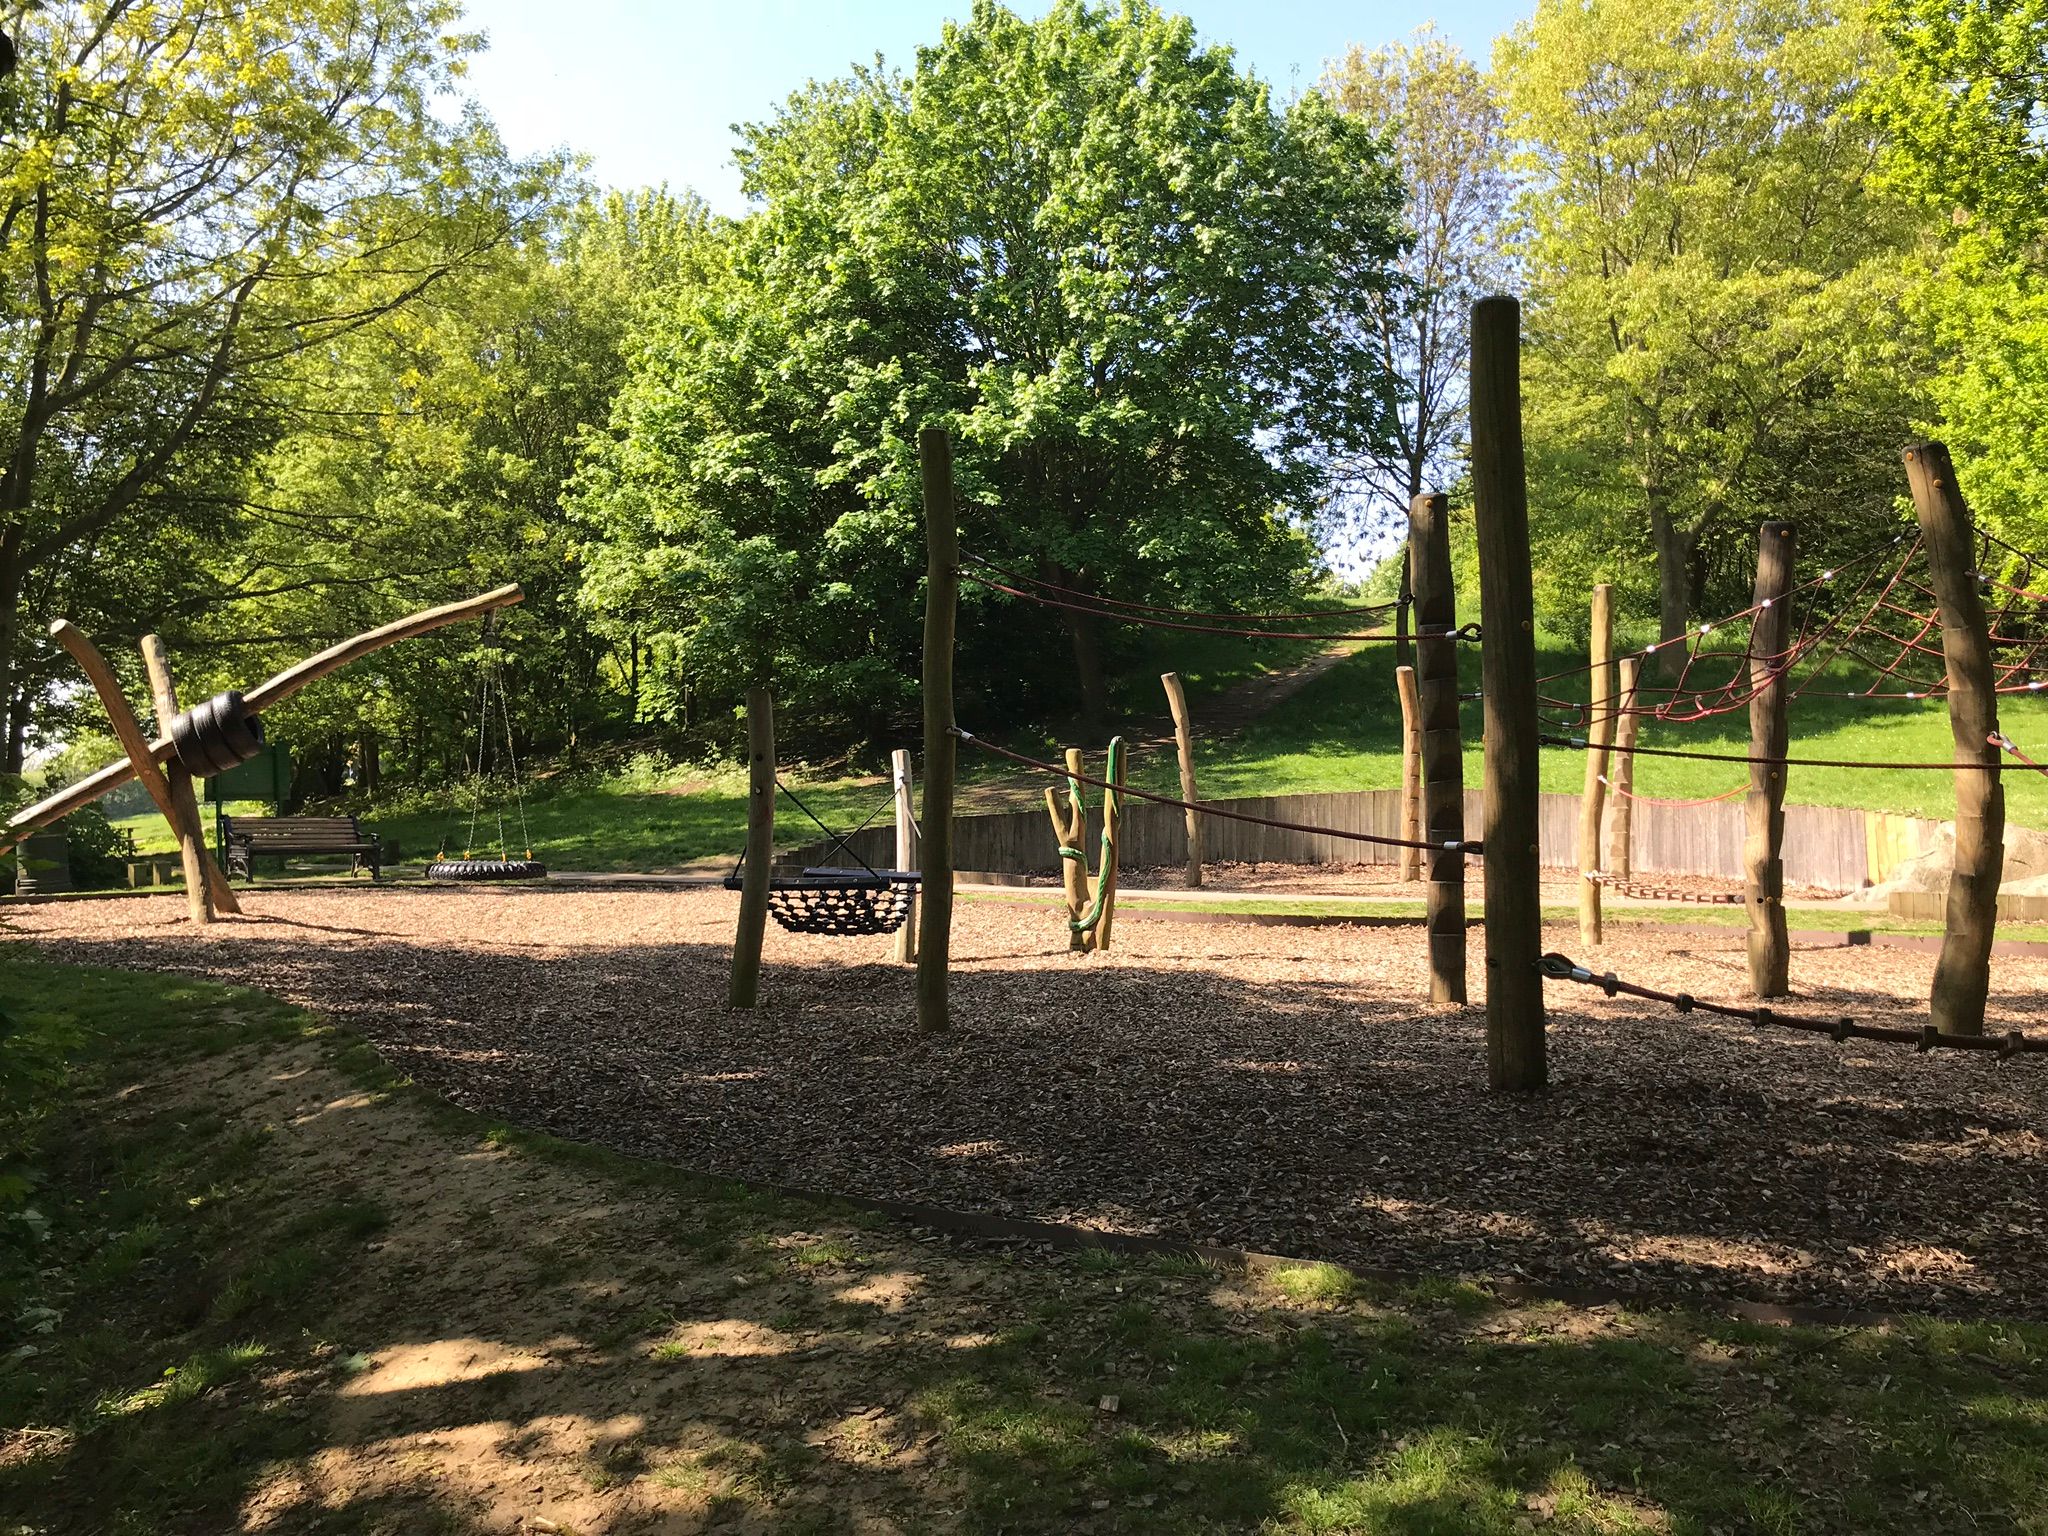 Chilrdren's play park in the wooded area.